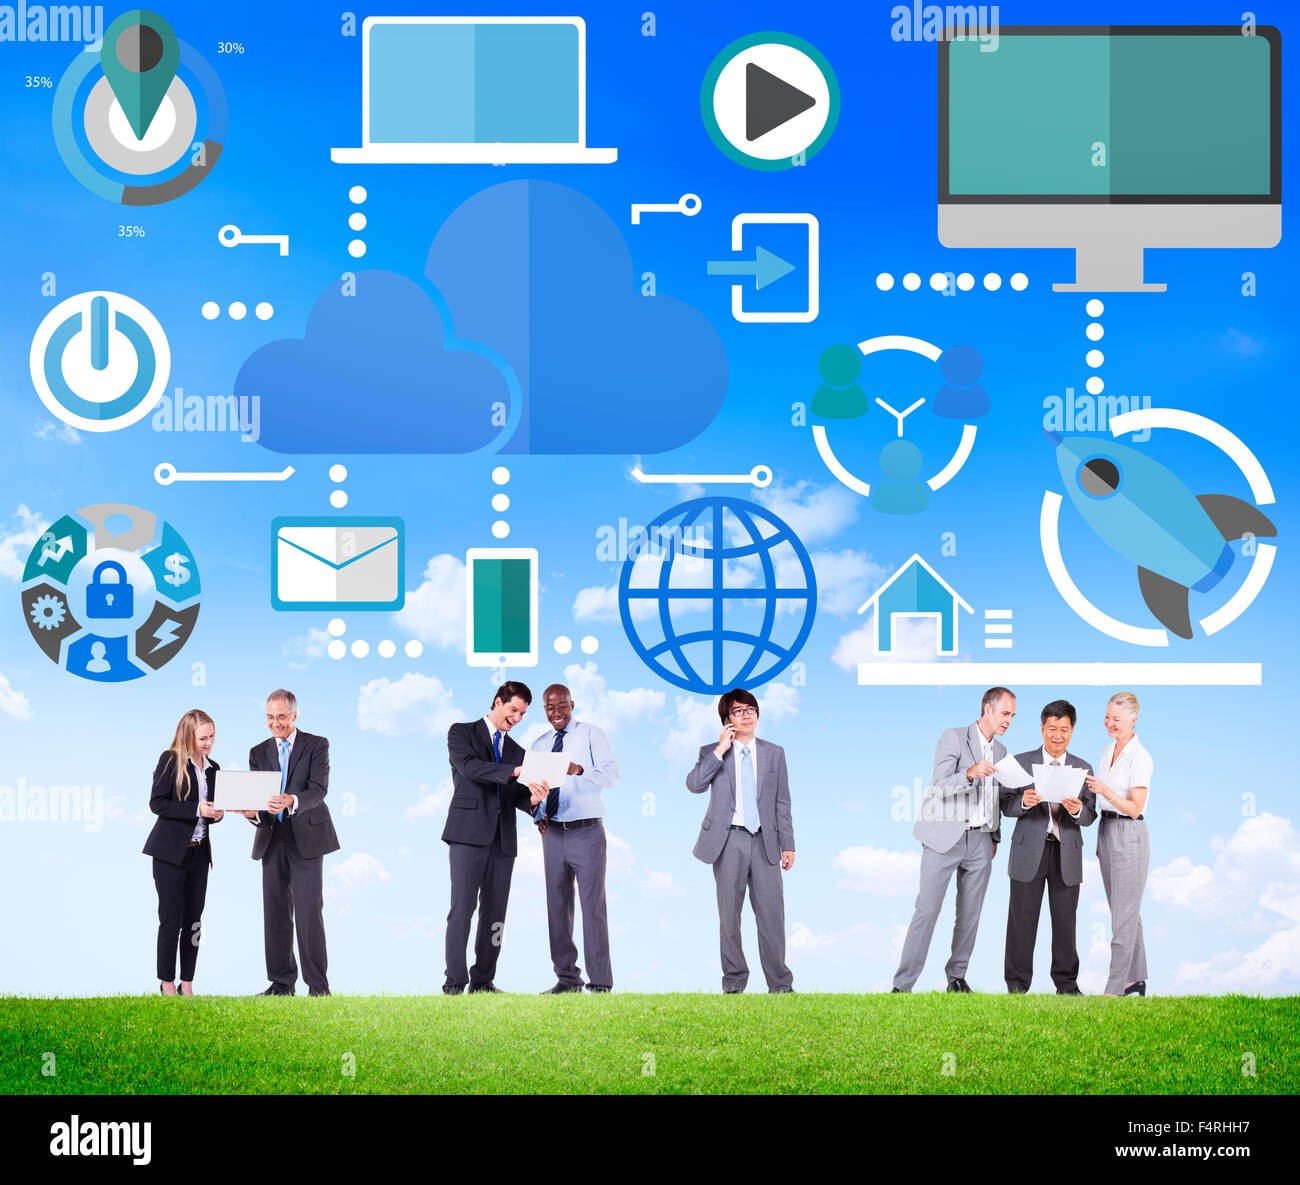 Big Data Sharing Online Global Communication Discussion Concept Stock Photo